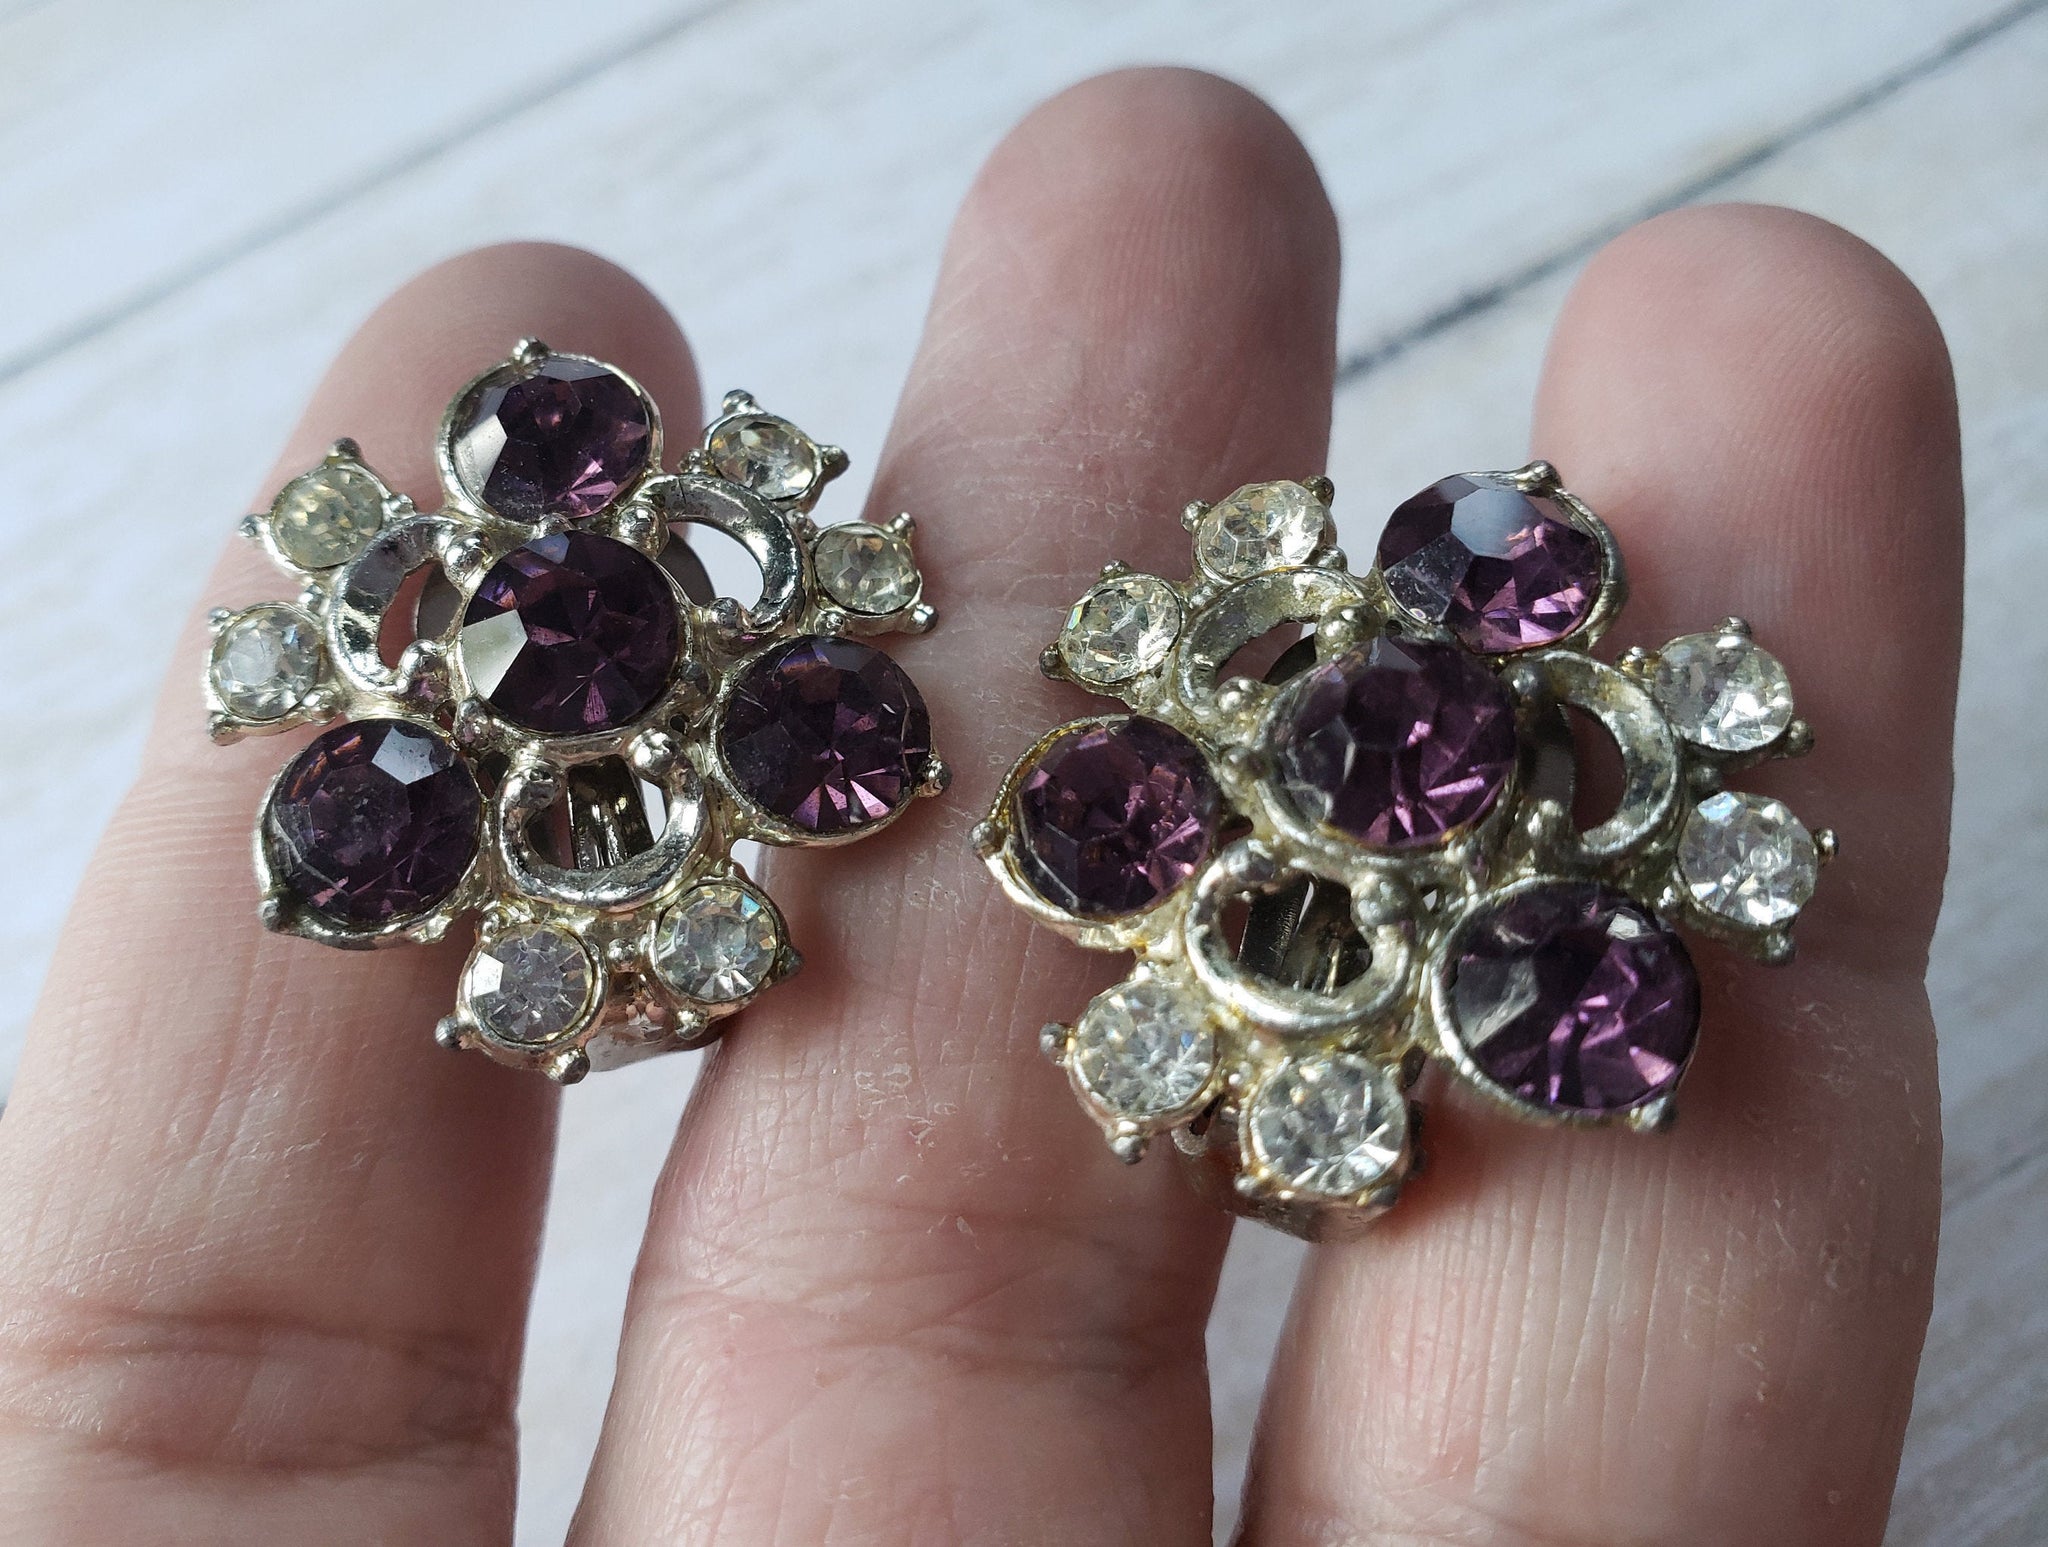 Share more than 223 purple costume earrings best